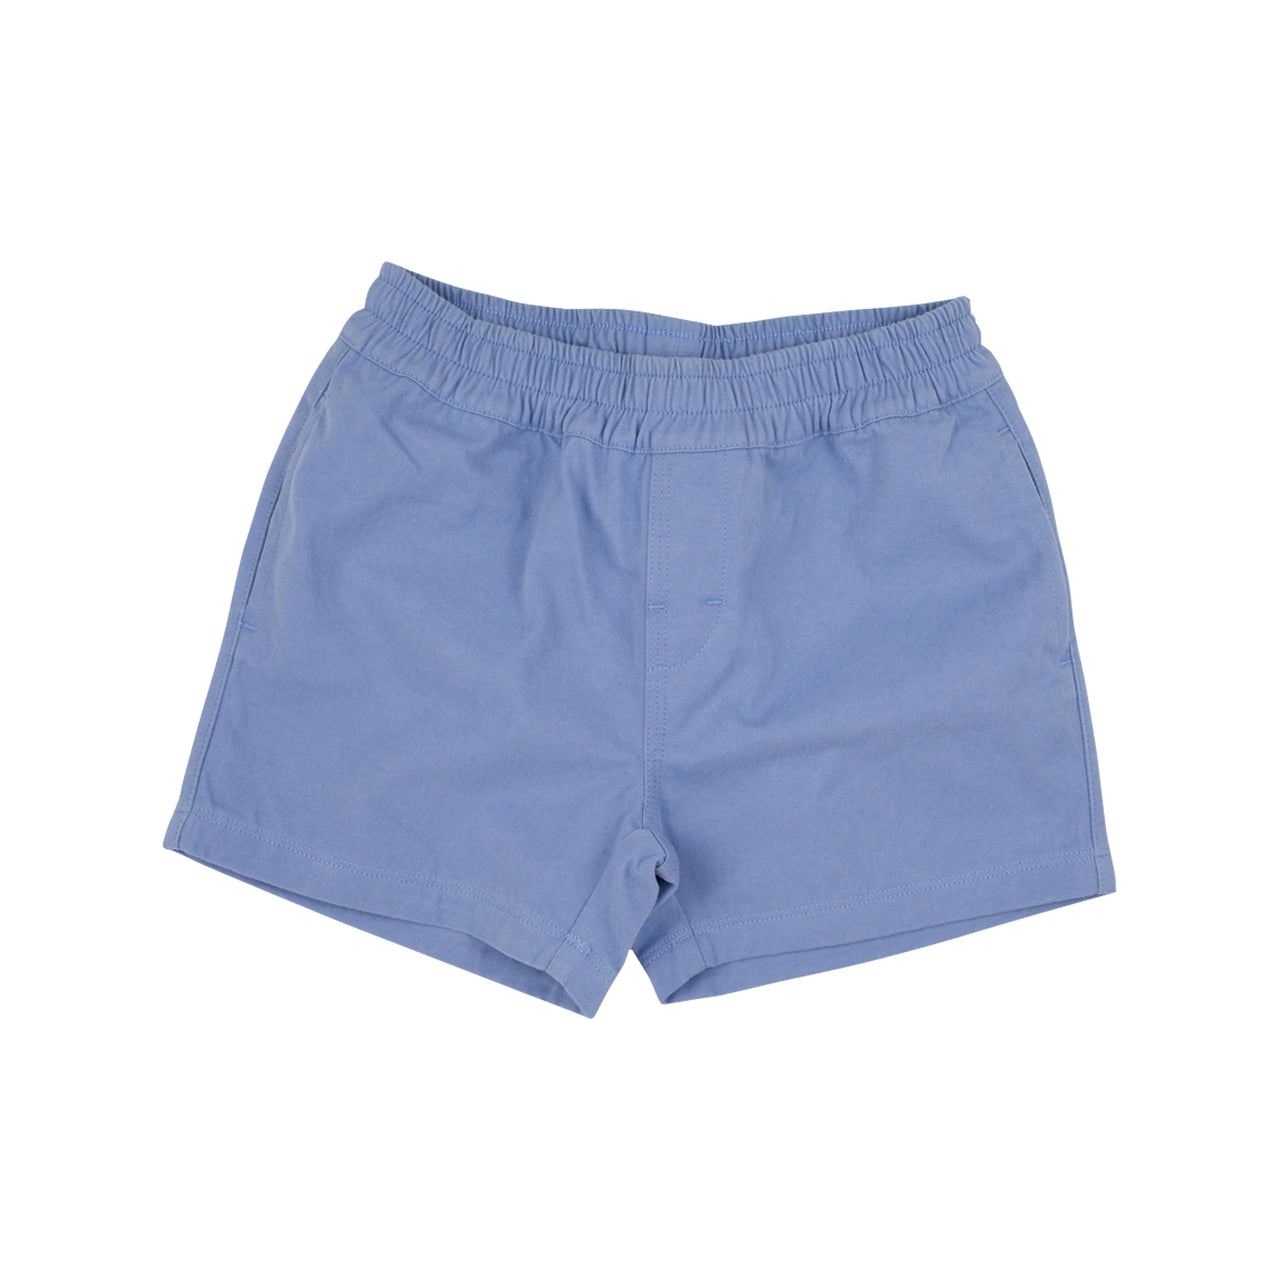 Sheffield Shorts | Park City Periwinkle With Worth Avenue White Stork